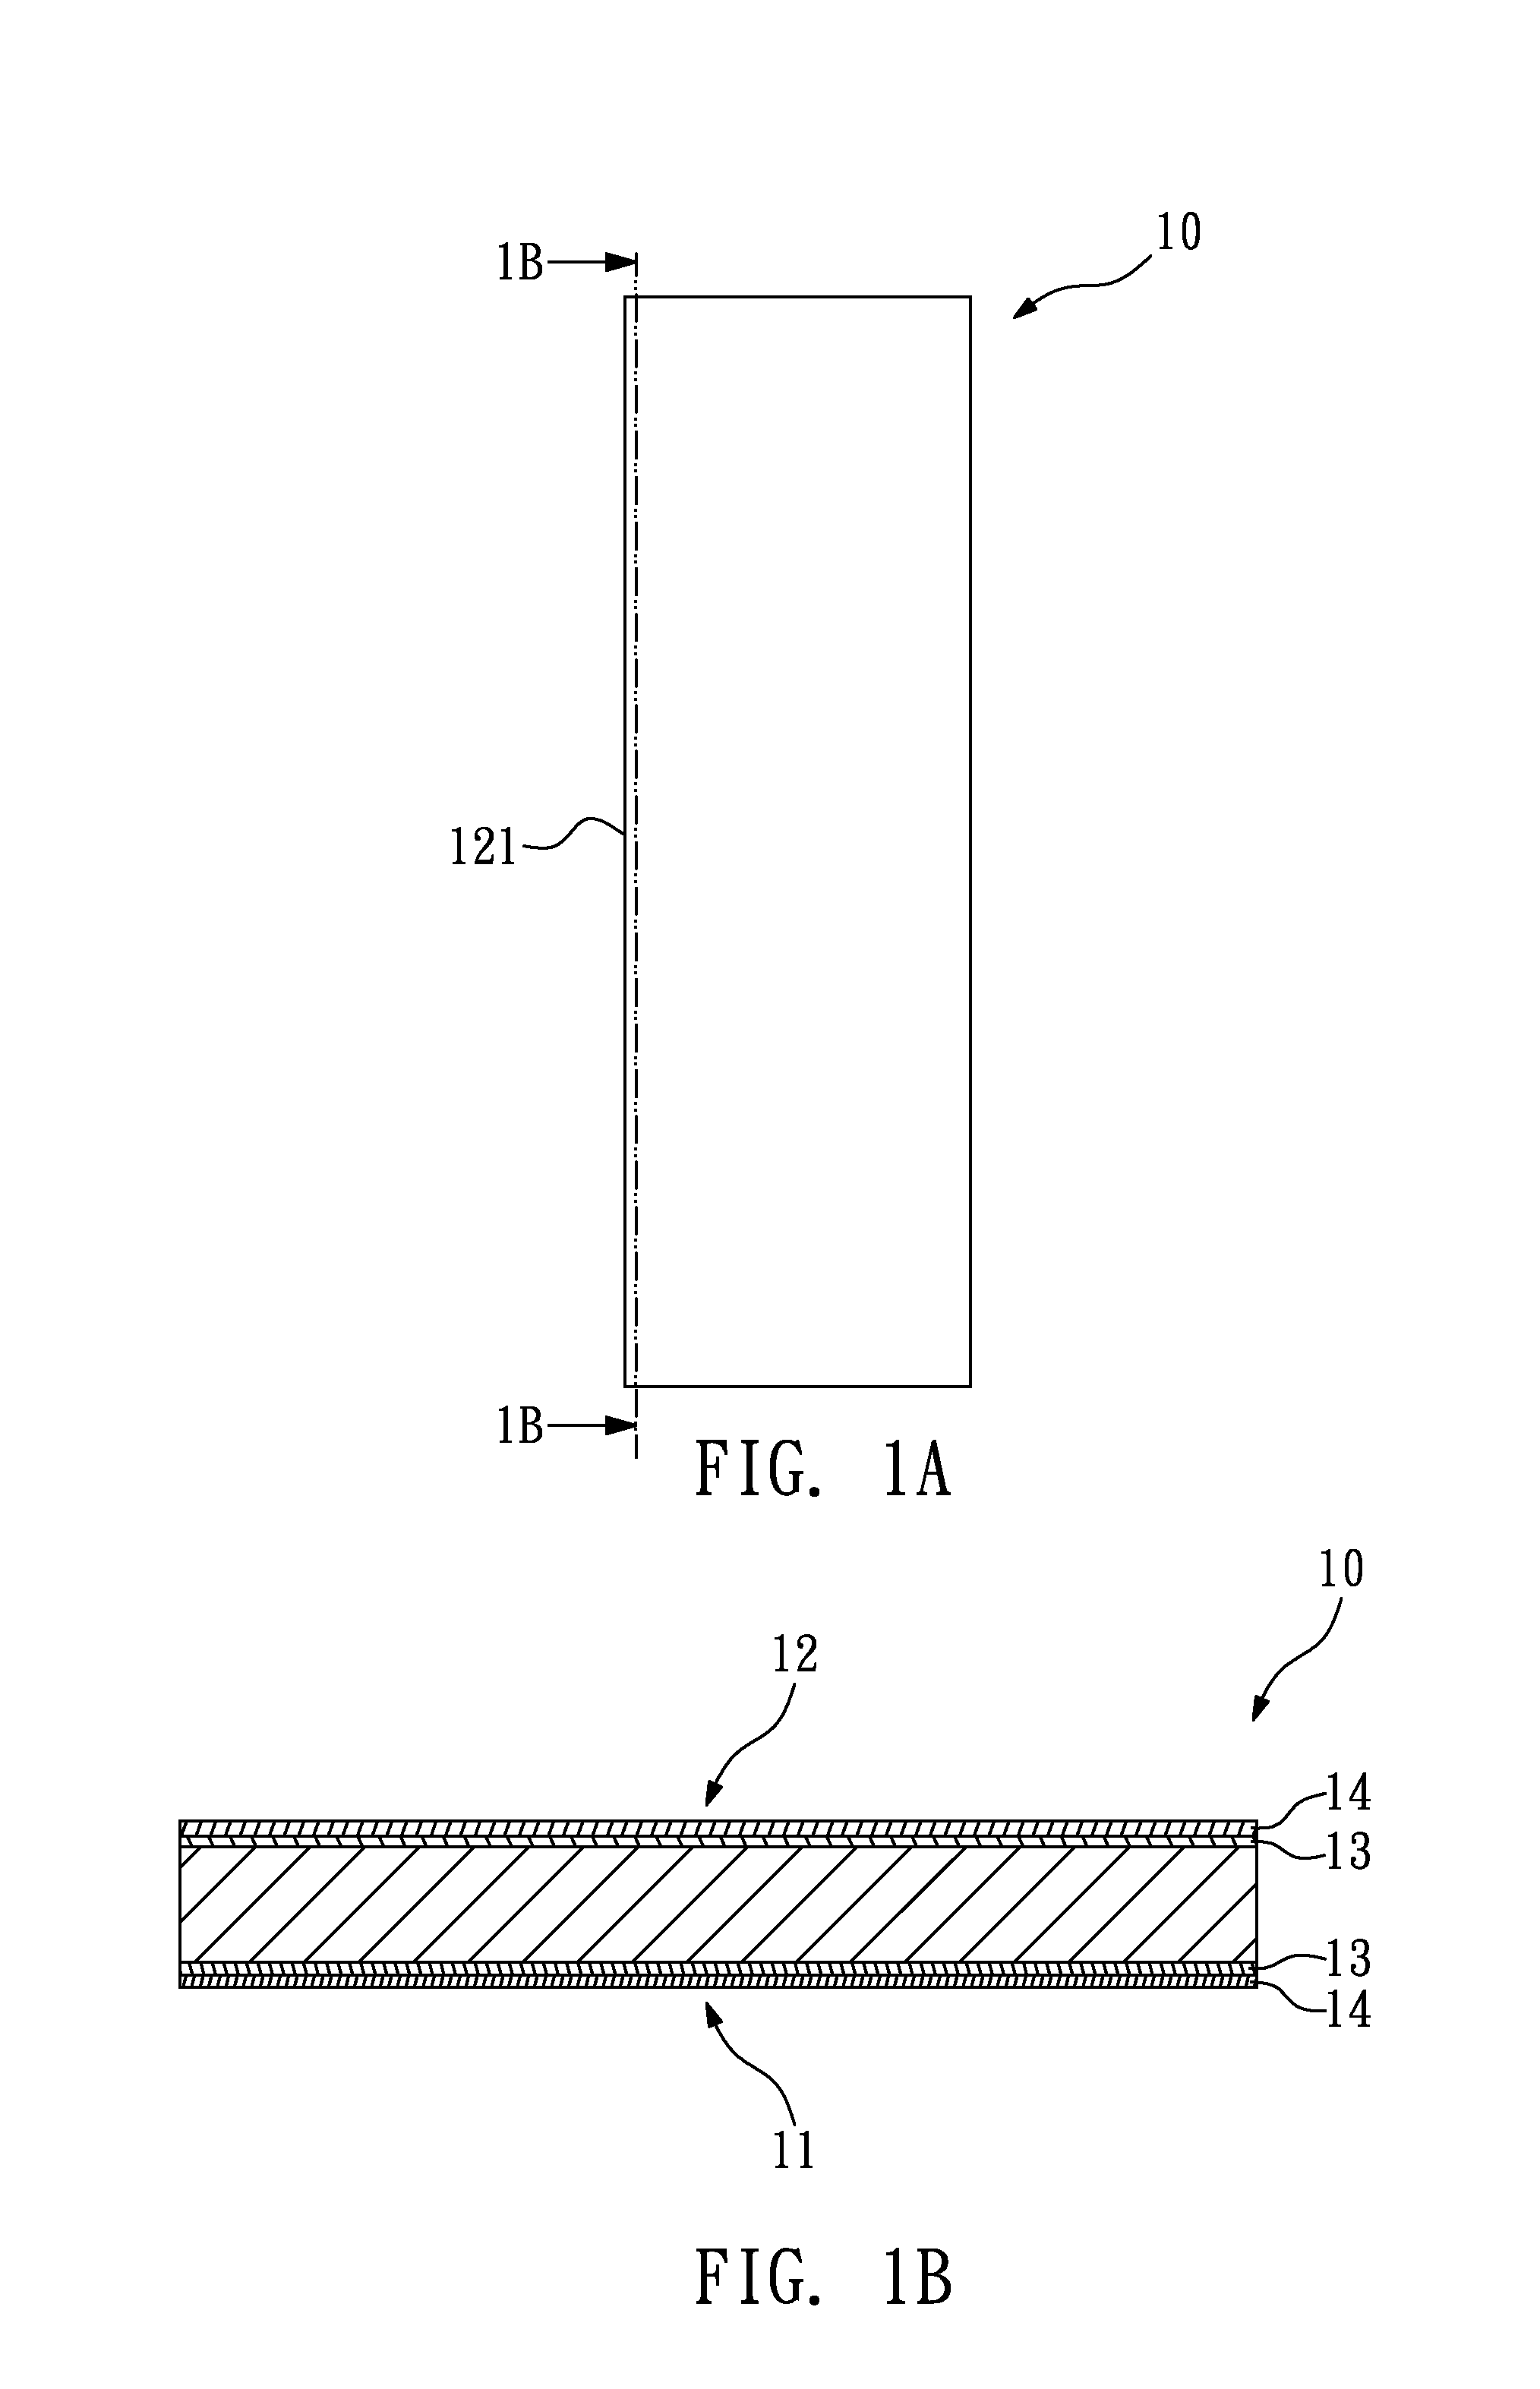 Silicon-based suspending antenna with photonic bandgap structure